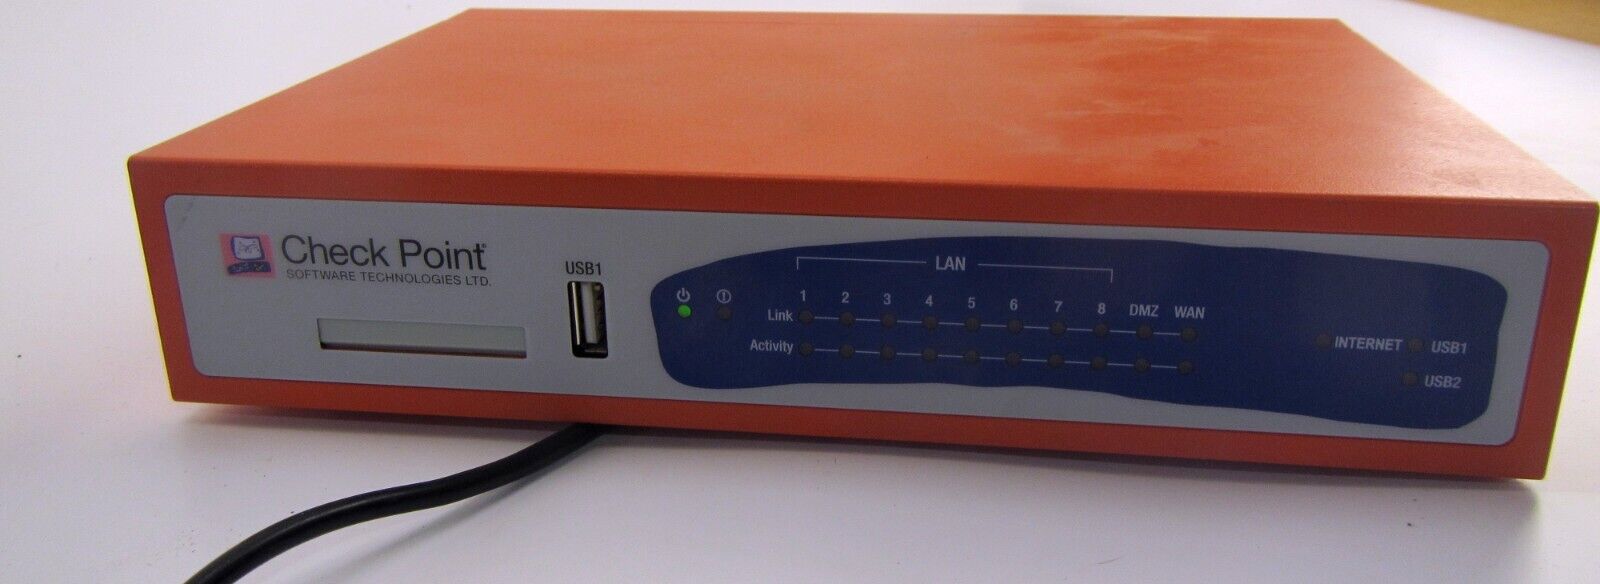 Check Point L-50W Router/Firewall WIFI N and 8 Port Switch